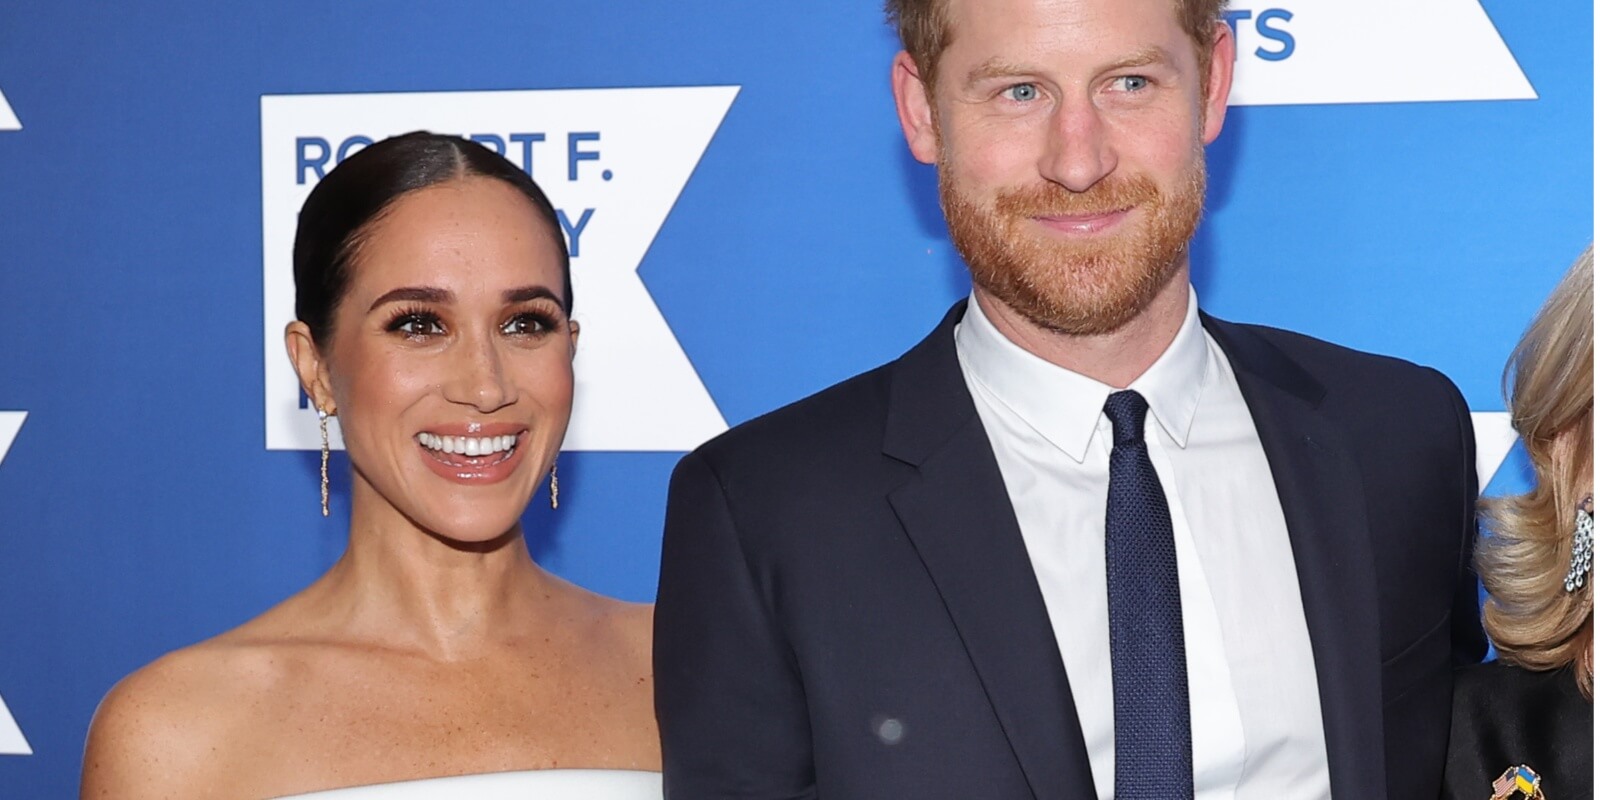 Meghan Markle and Prince Harry attend the 2022 Robert F. Kennedy Human Rights Ripple of Hope Gala at New York Hilton on December 06, 2022 in New York City.